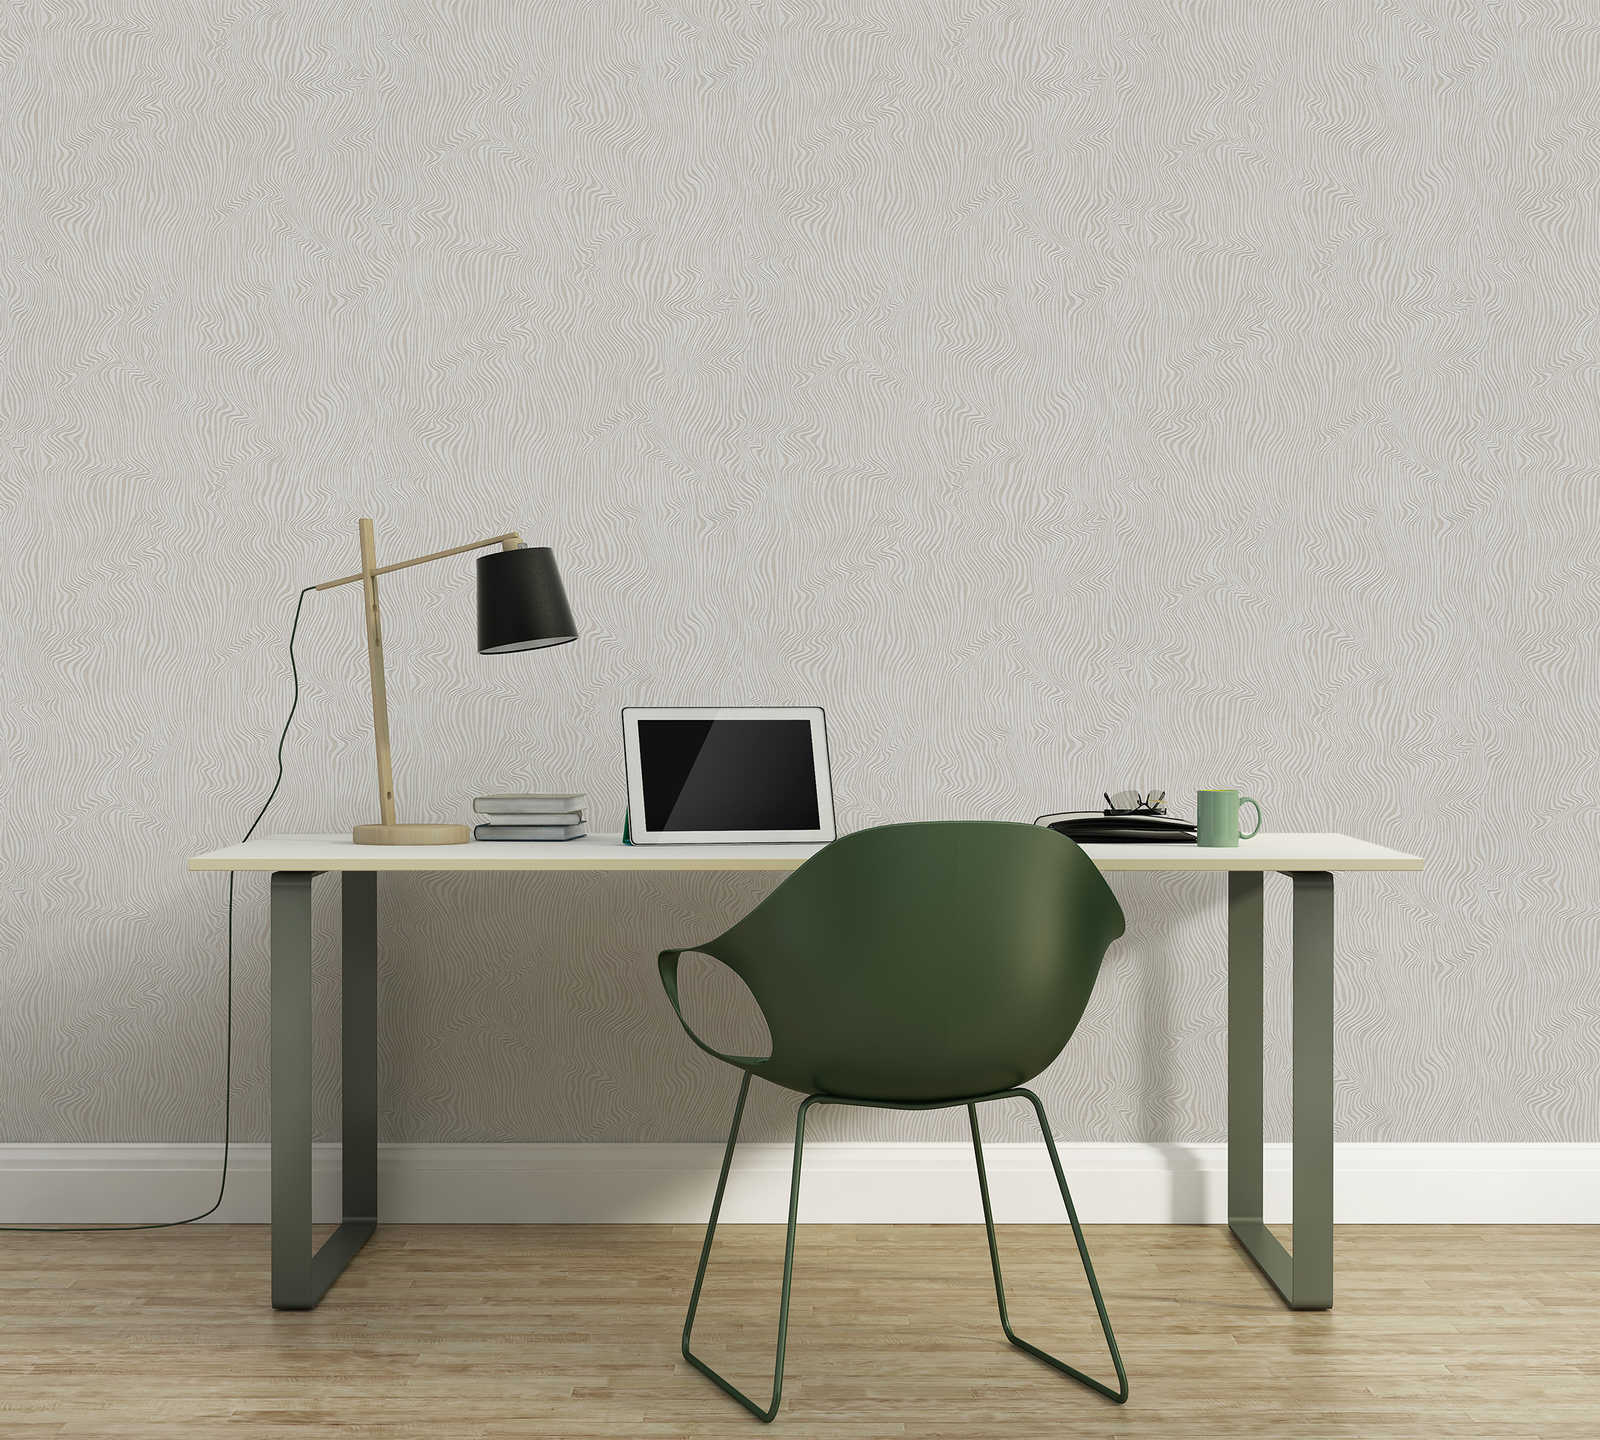             Textured wallpaper with line pattern plain - grey
        